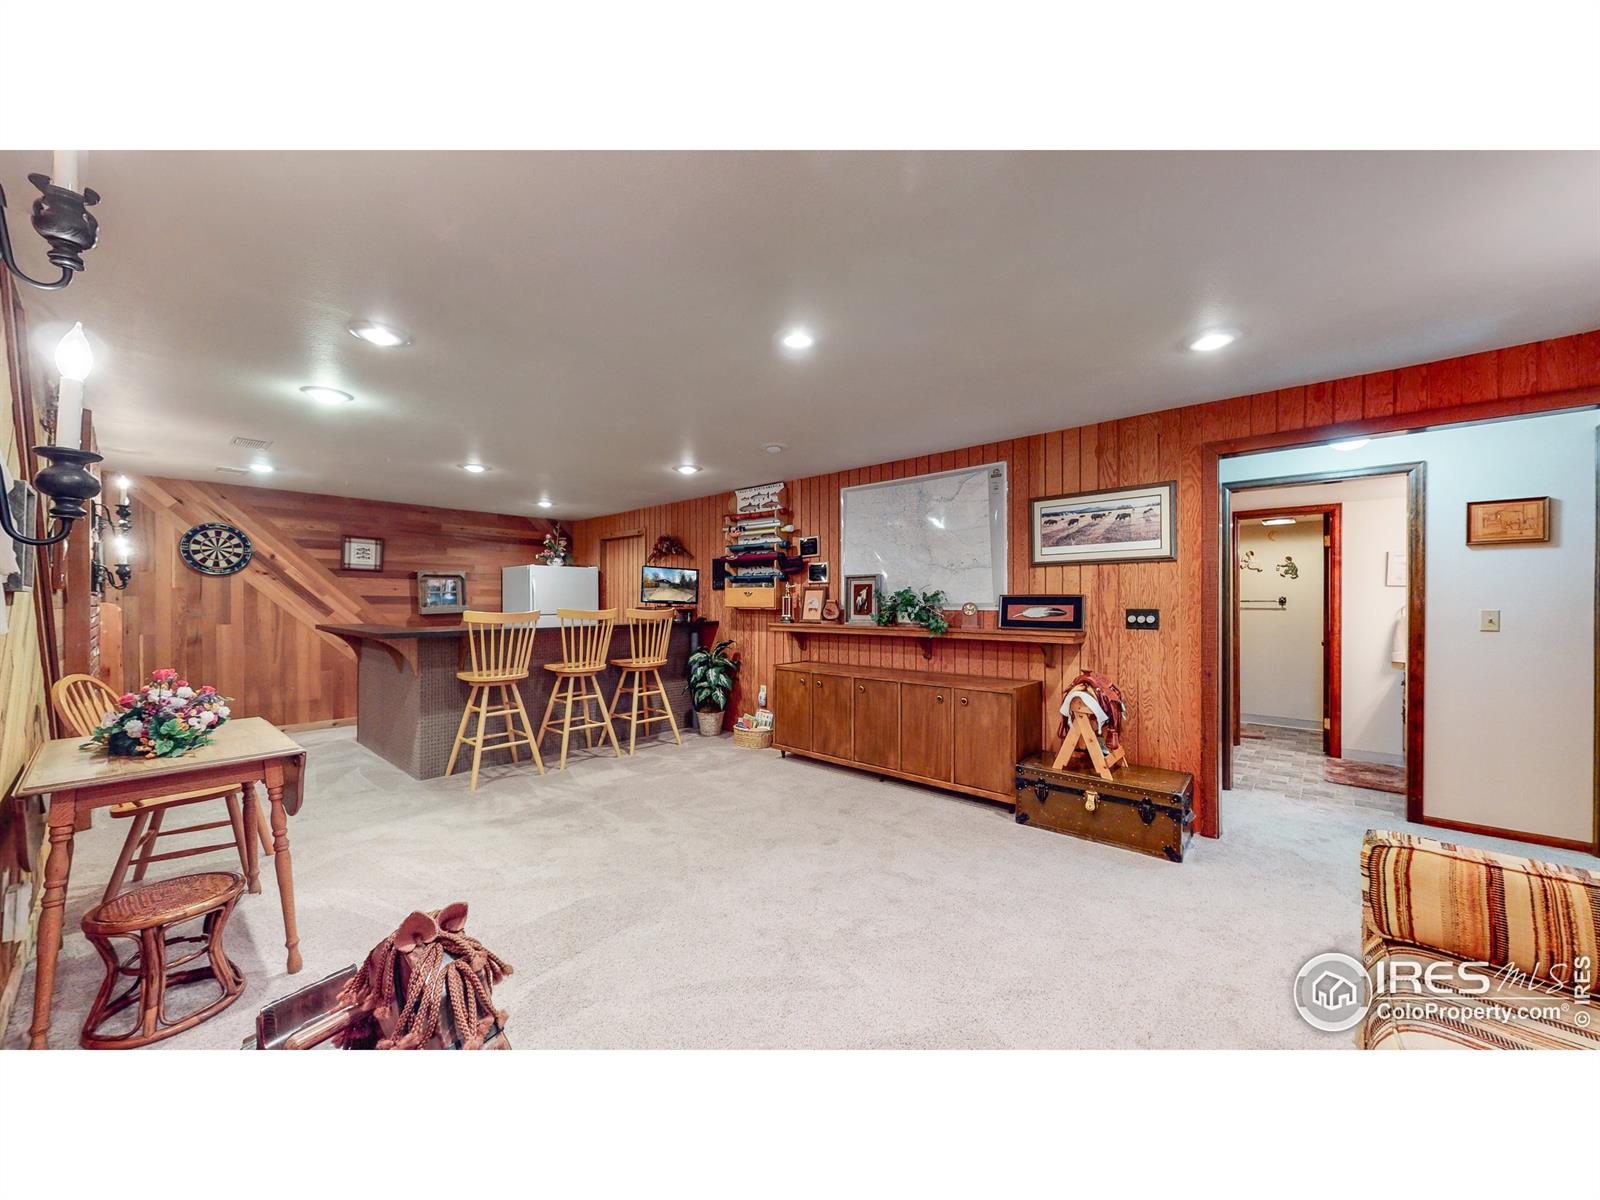 5108 Greenway, Fort Collins, CO